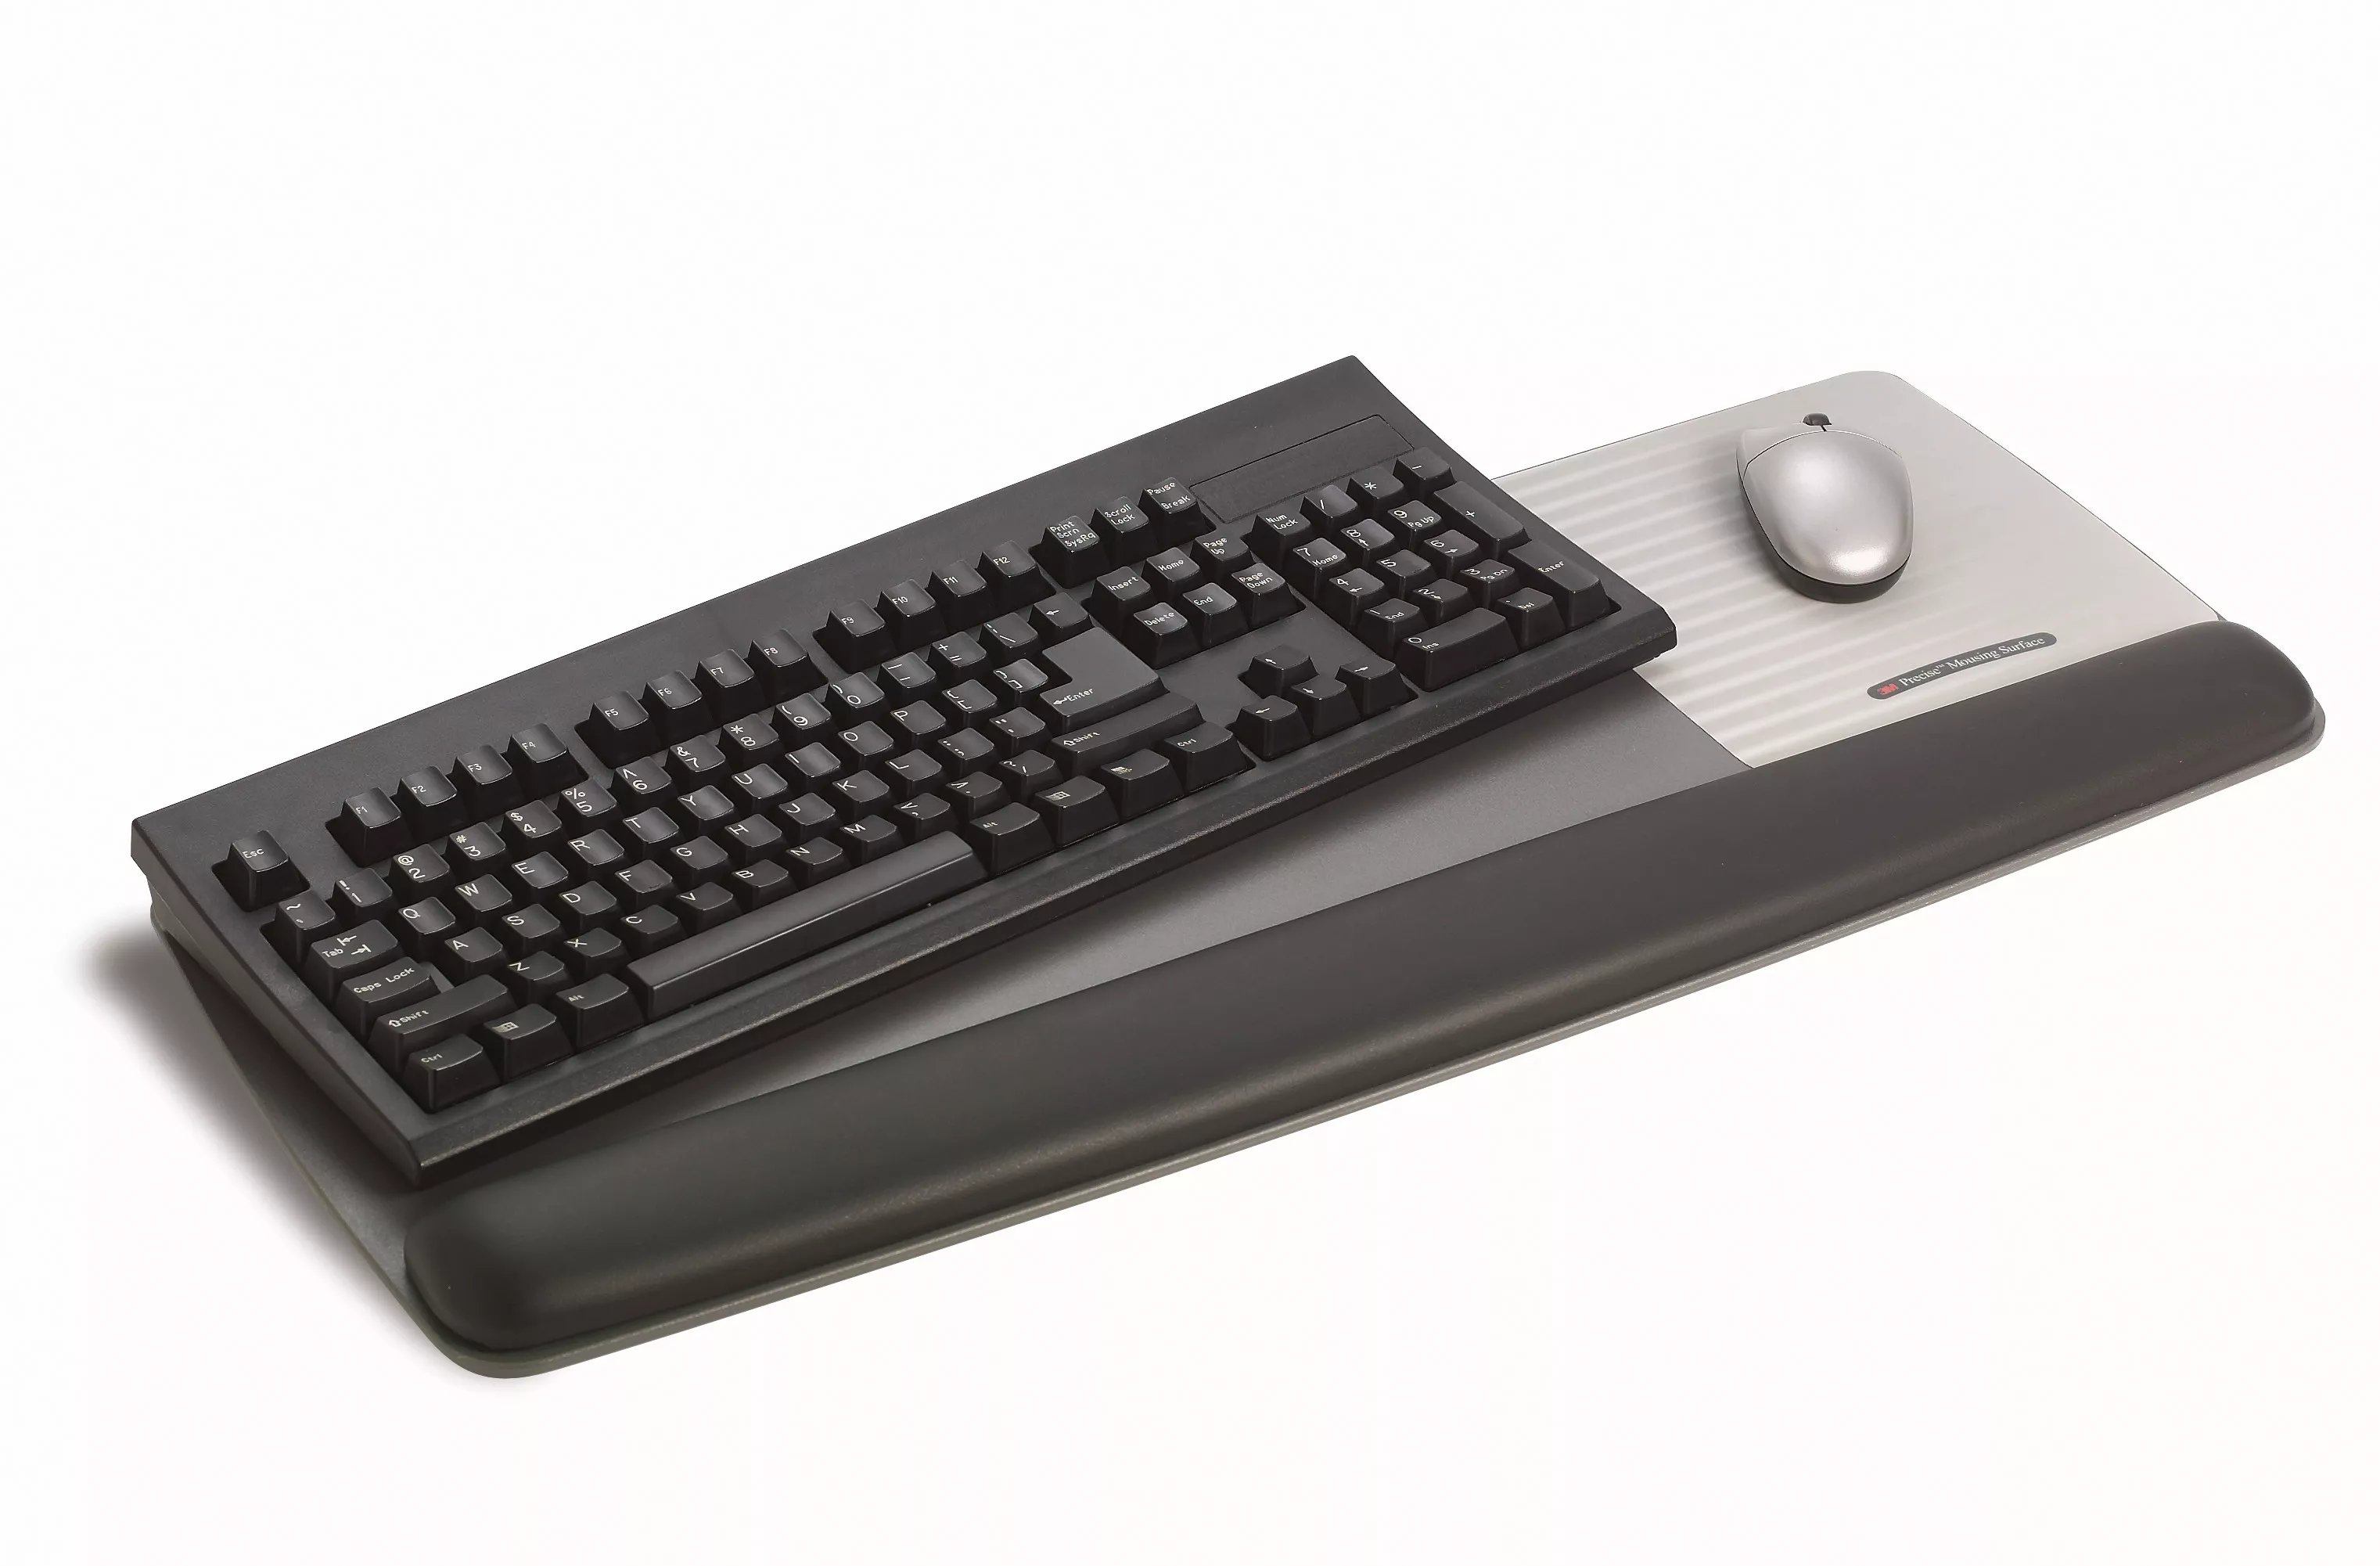 SKU 7100087063 | 3M™ Gel Wristrest Platform For Keyboard and Mouse With Precise™ Battery
Saving Mouse Pad